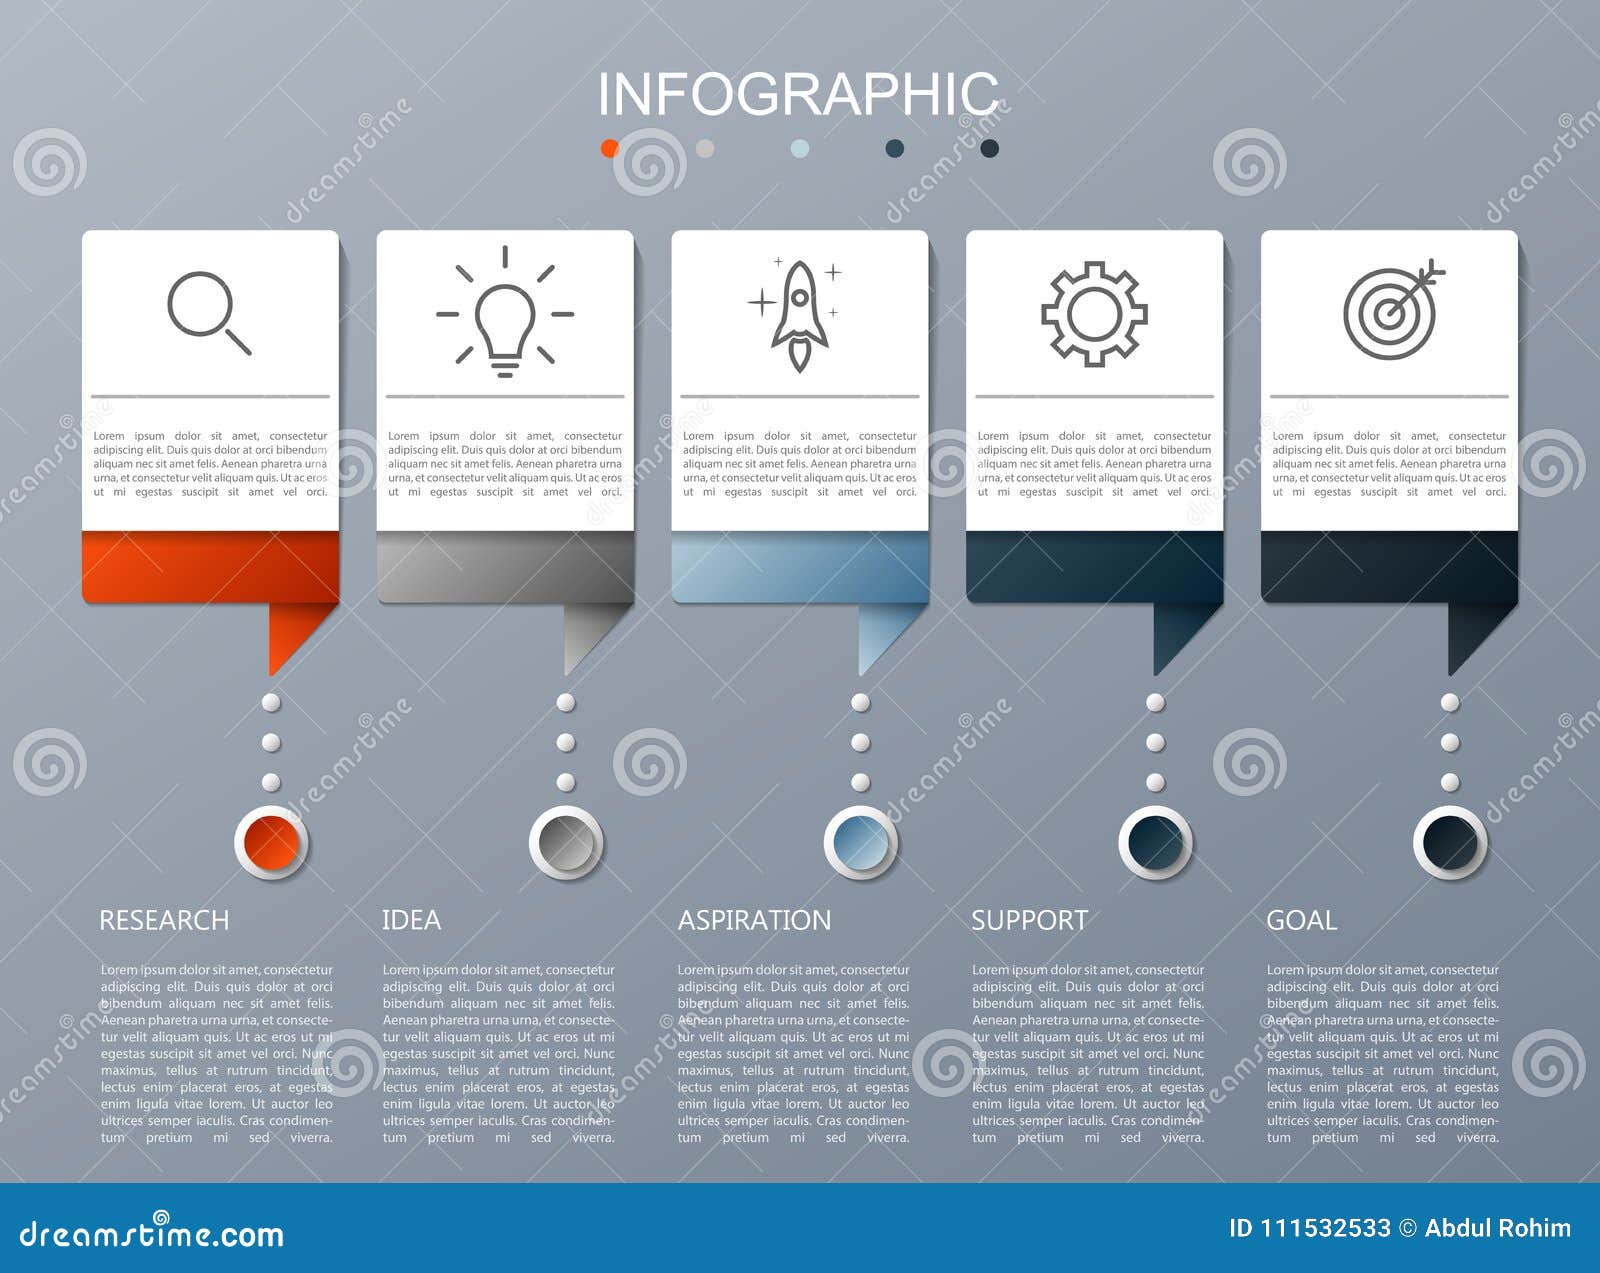 Infographic Design And Marketing Icons Modern Stock Vector Illustration Of Presentation Newsletter